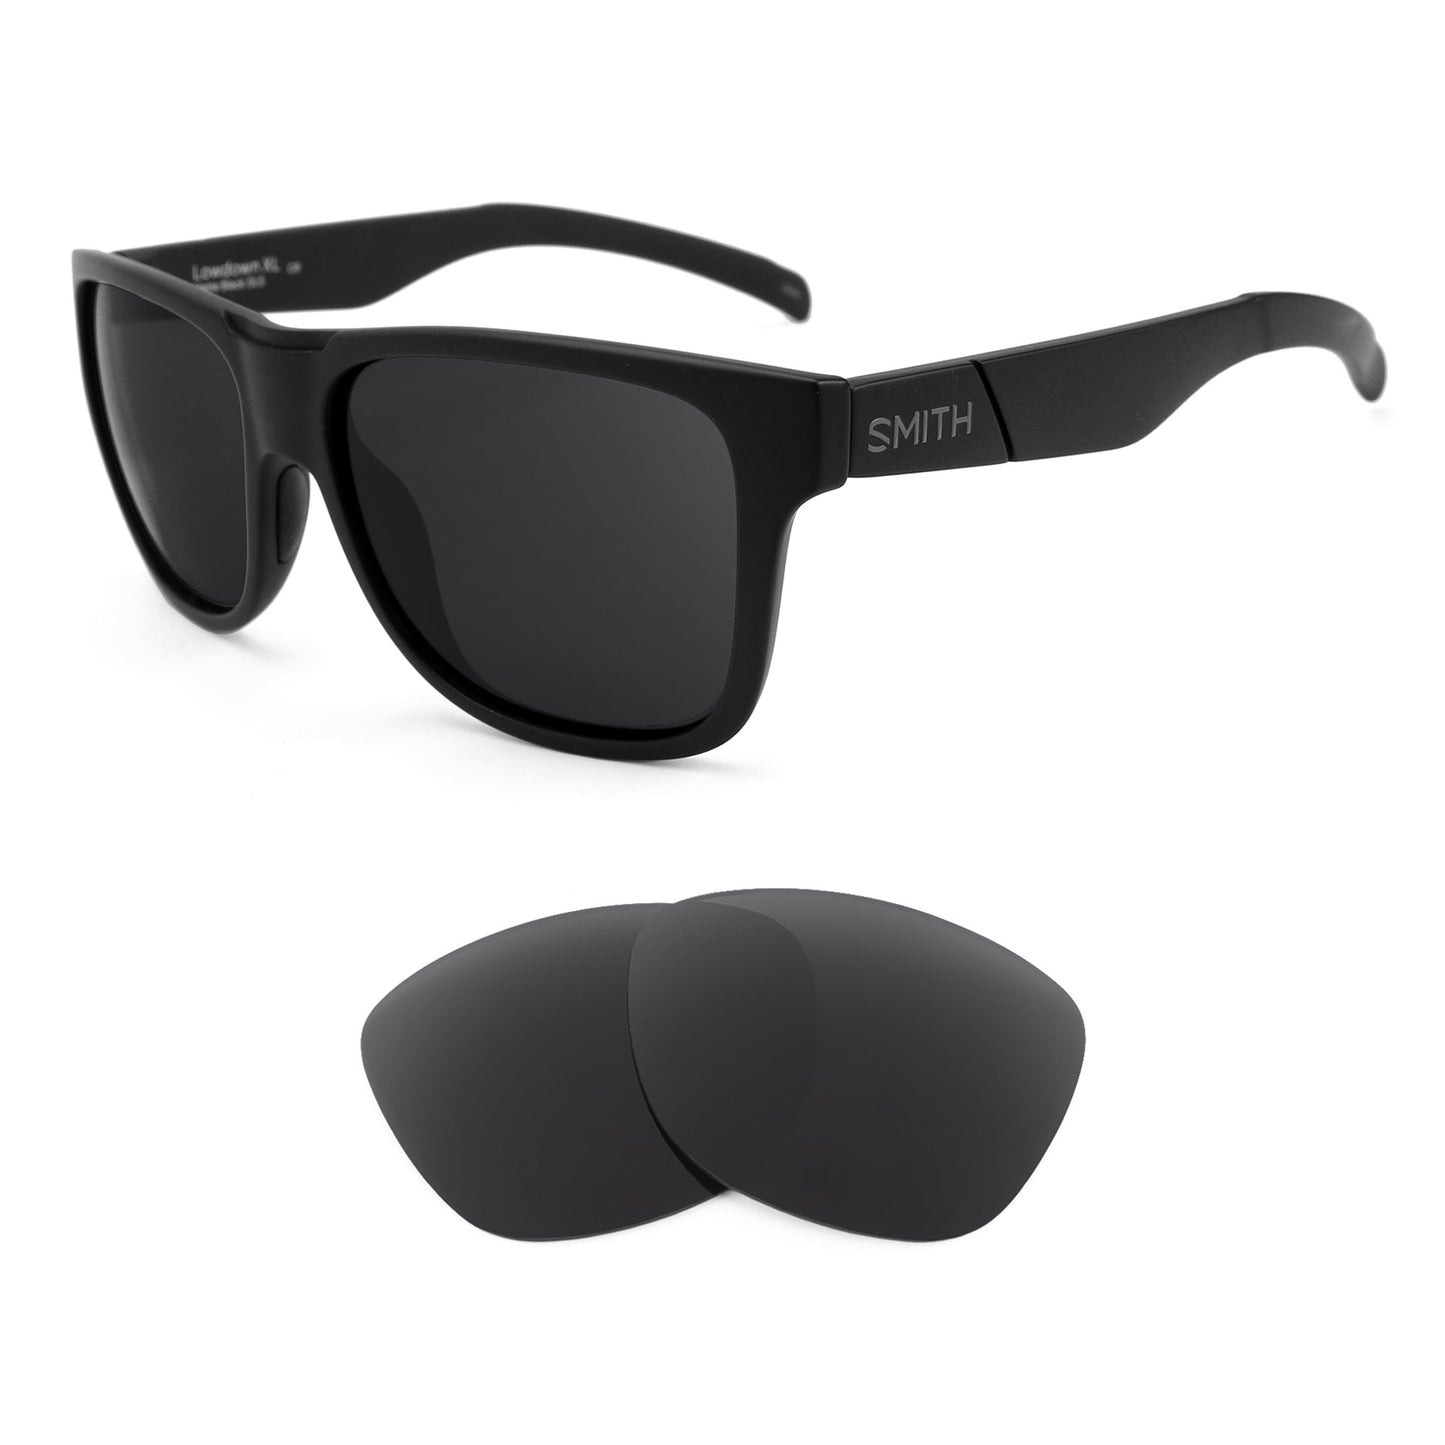 Smith Lowdown XL sunglasses with replacement lenses